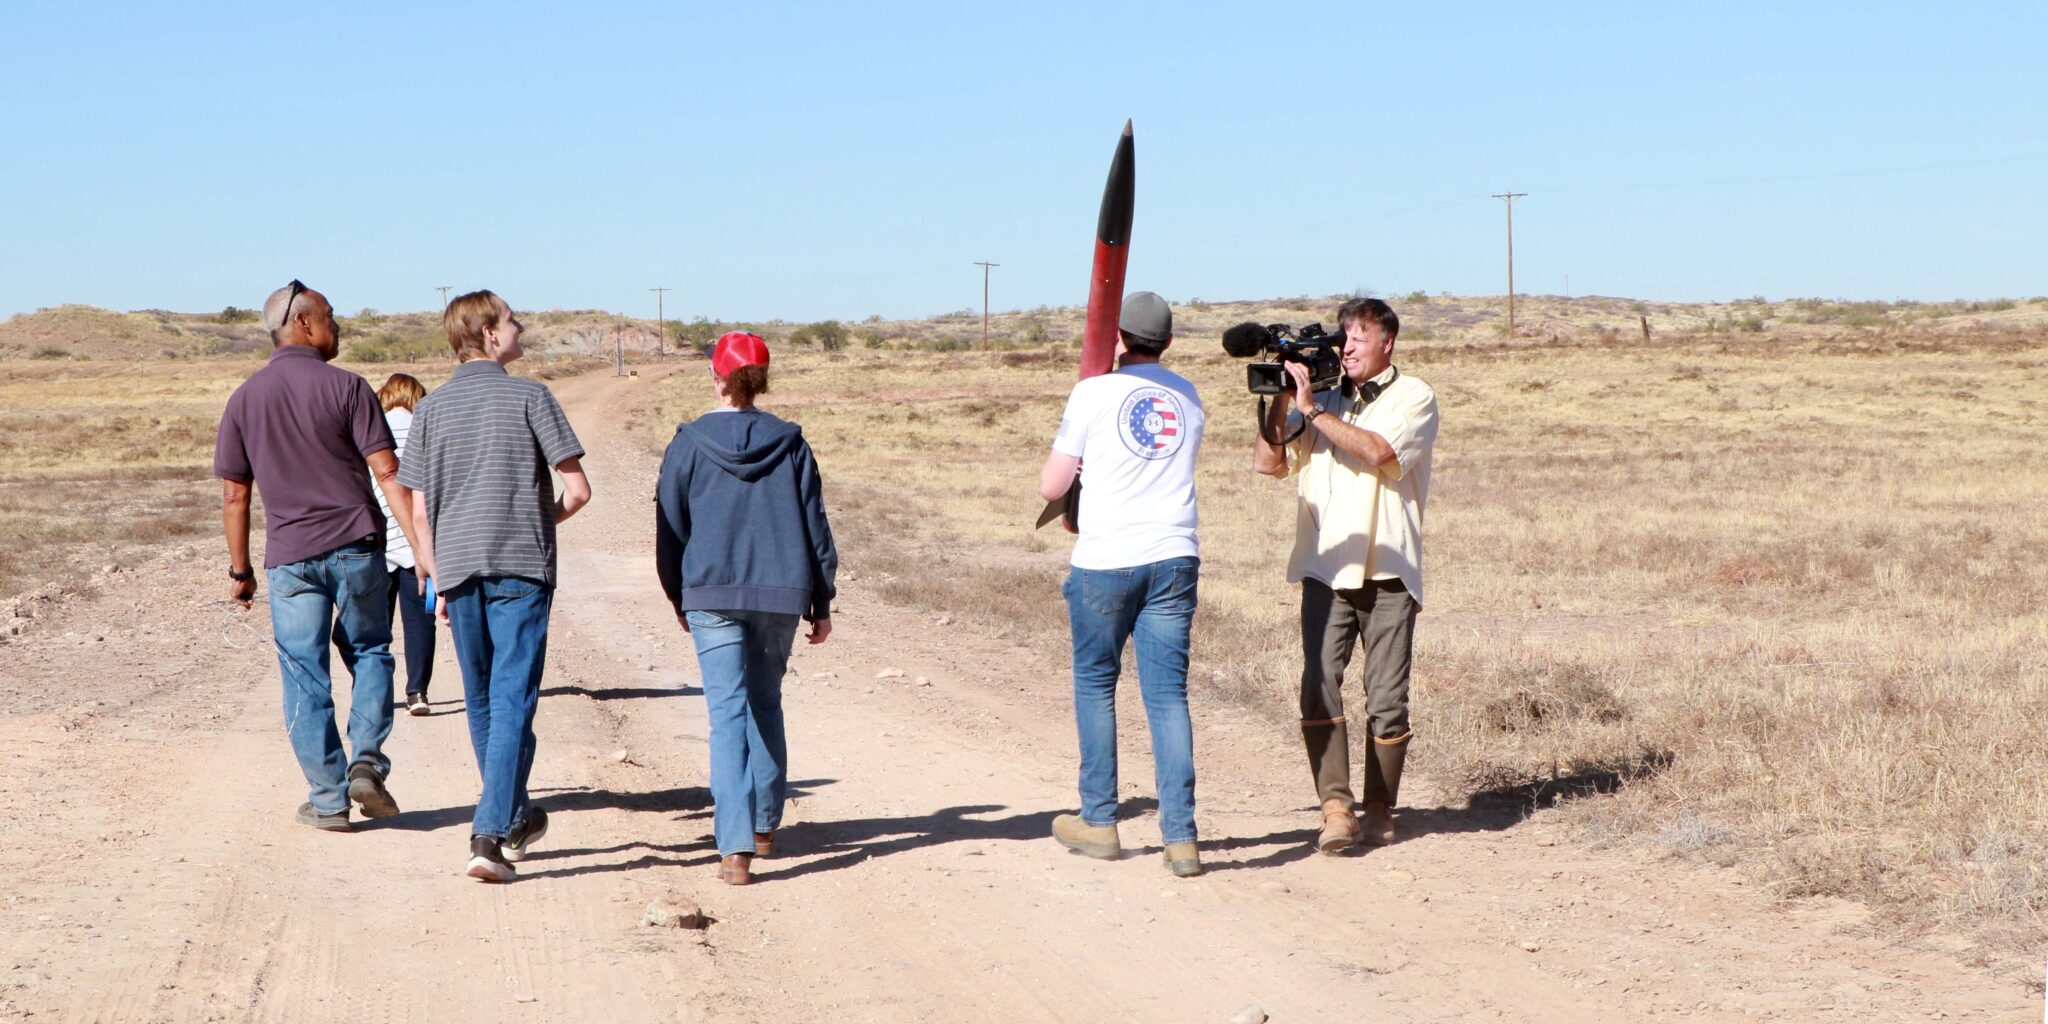 Students and a videographer carry a rocket to launch.